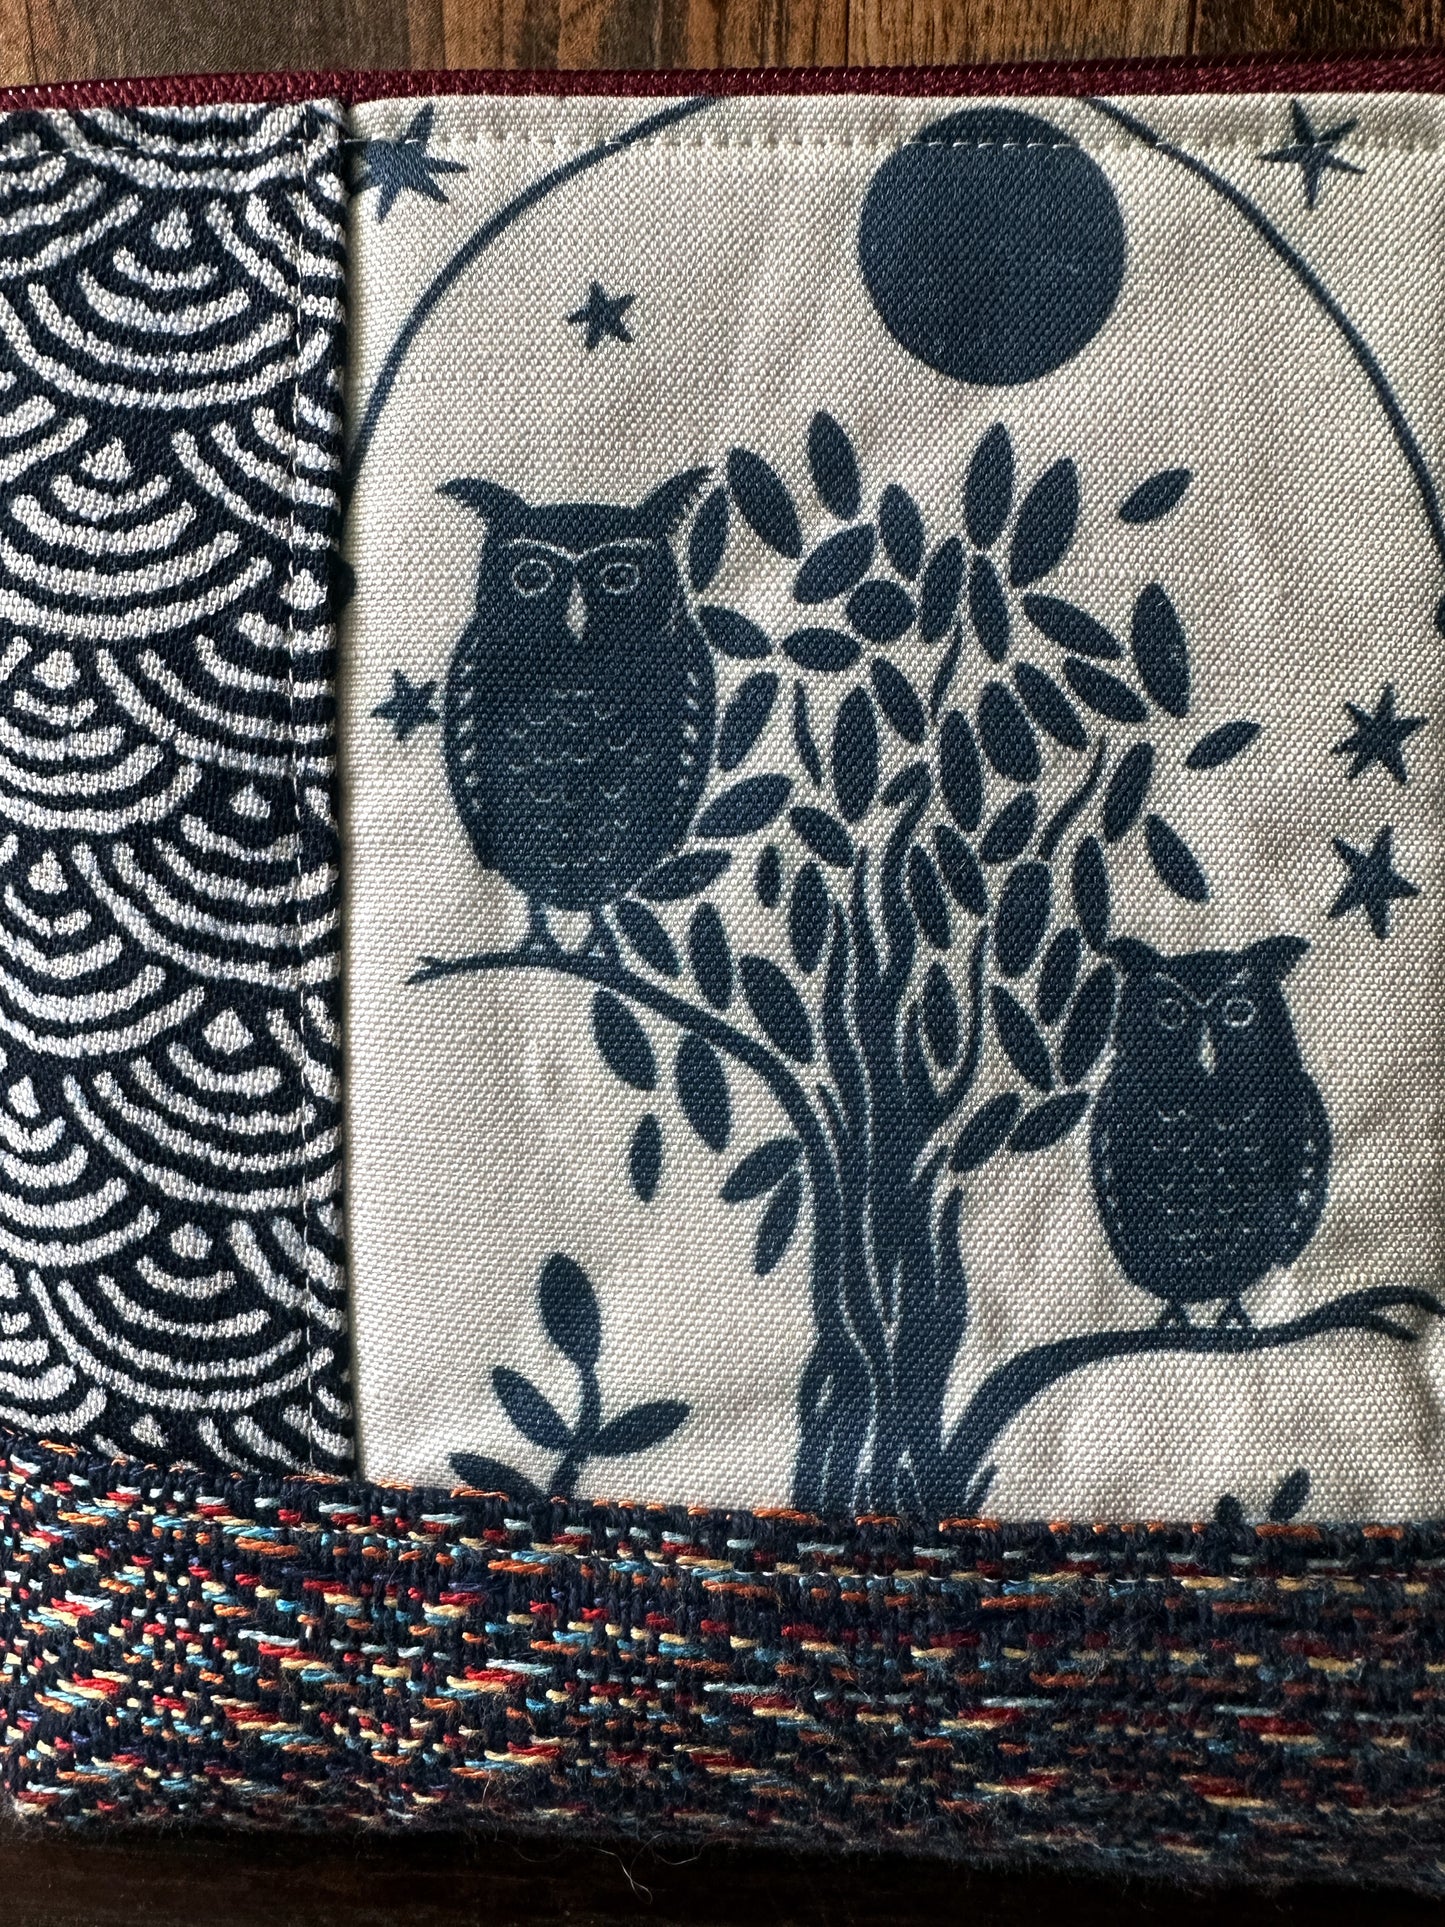 Owl and Raccoon Padded Project or Cosmetic Bag